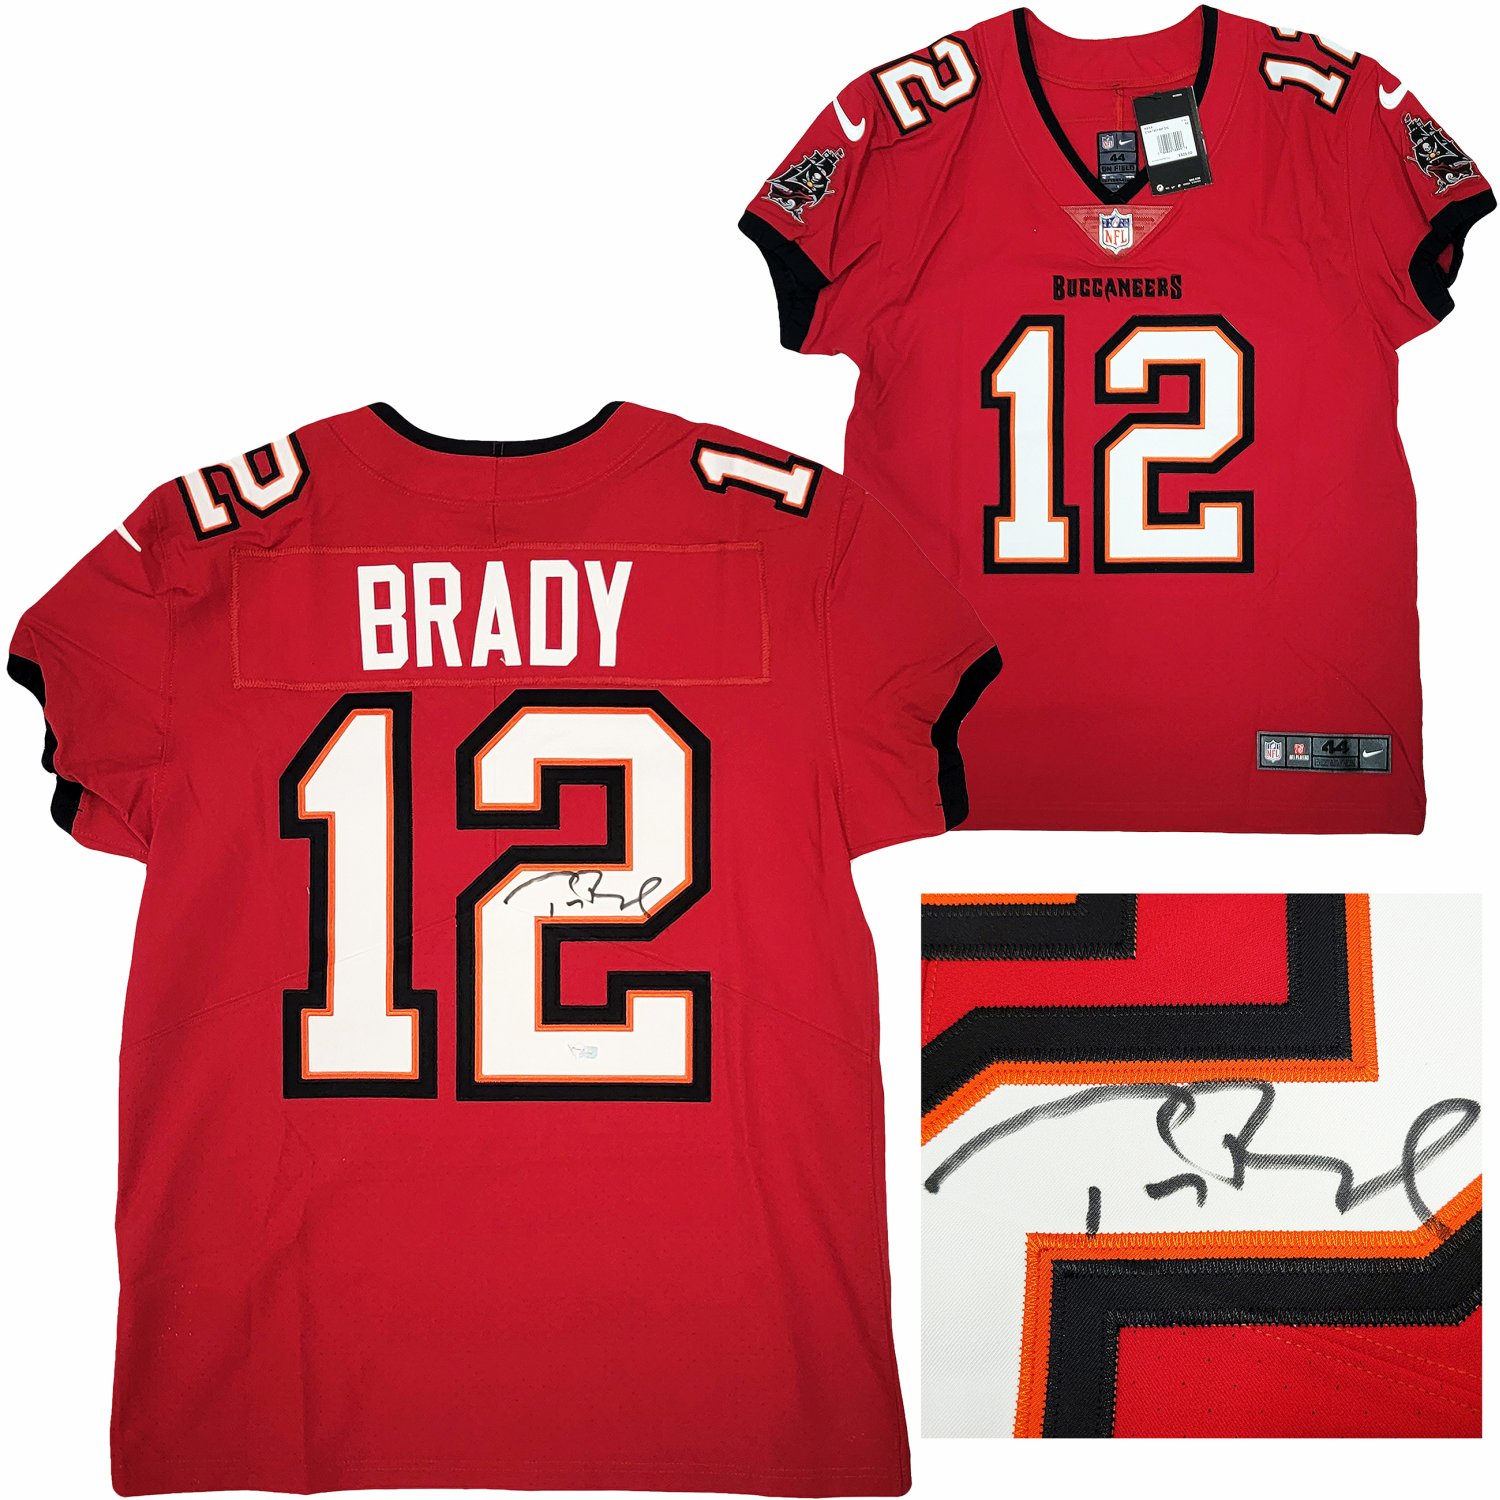 Tom Brady Autographed Signed Tampa Bay Buccaneers Red Nike Elite Jersey  Size 44 Fanatics Holo